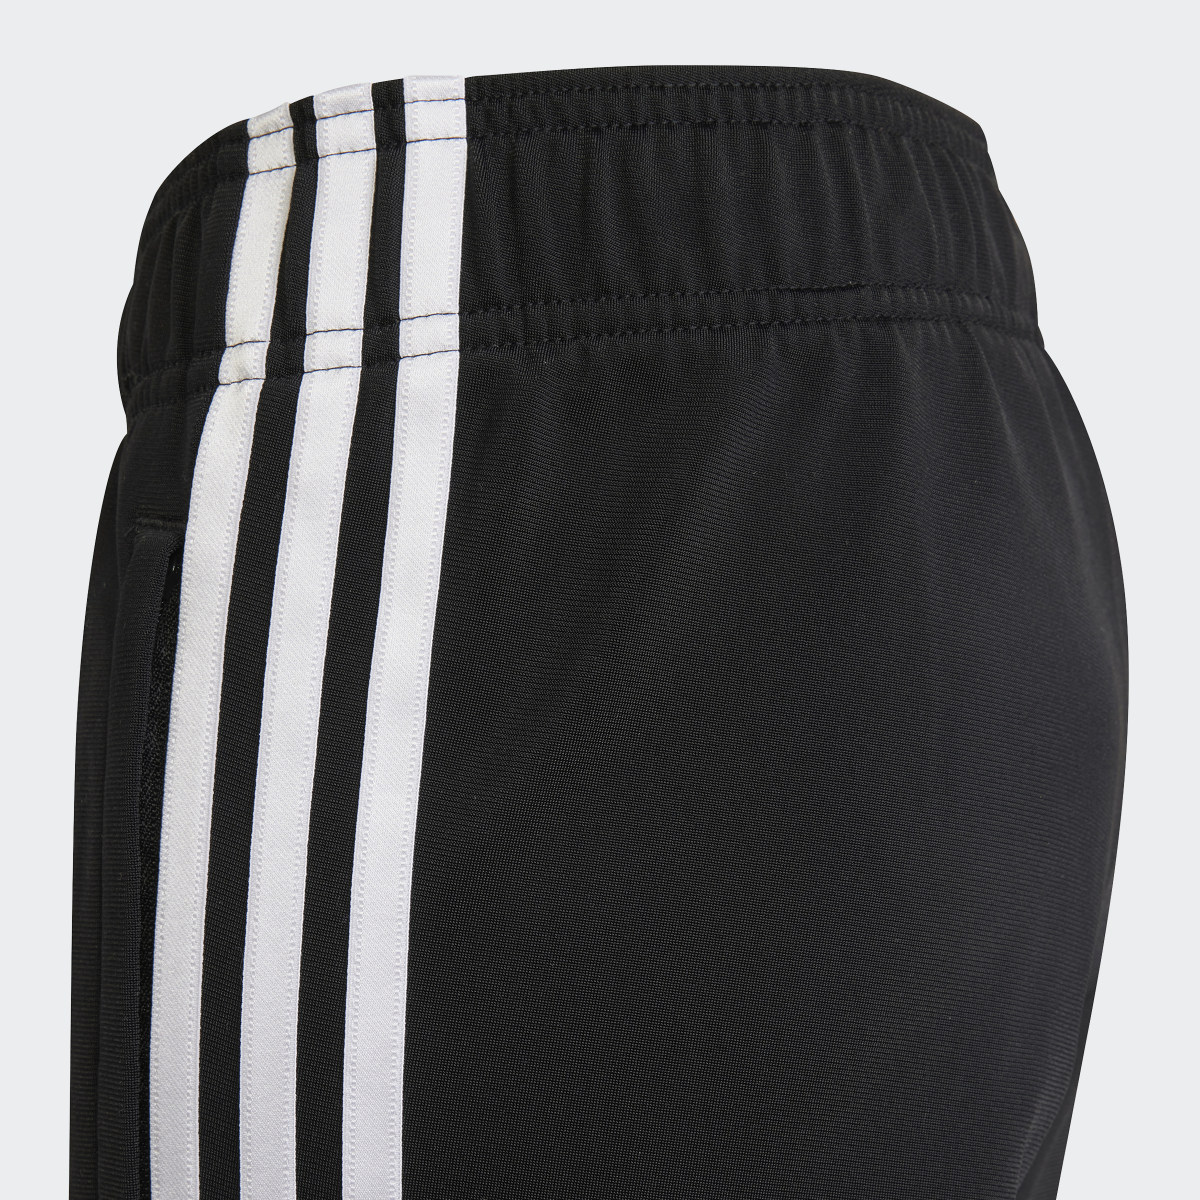 Adidas 3-Stripes Flared Tracksuit Bottoms. 5